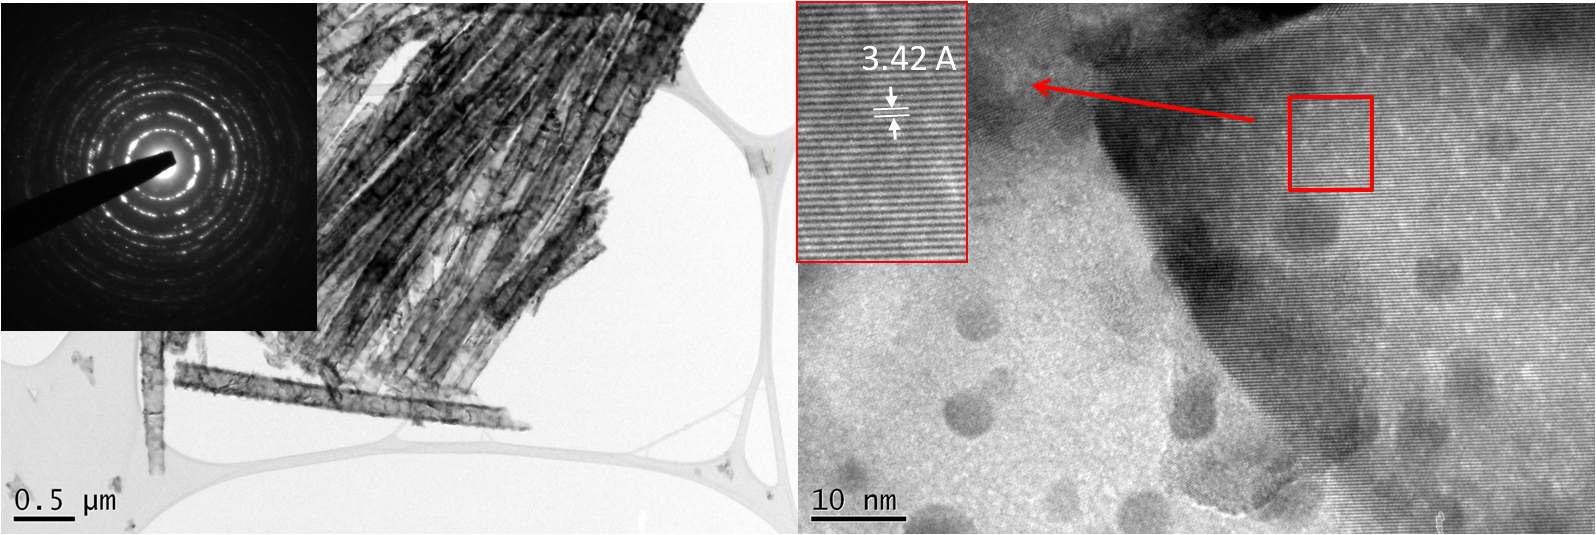 TEM images of Bi2O3 nanoparticles on TiO2 NTs.